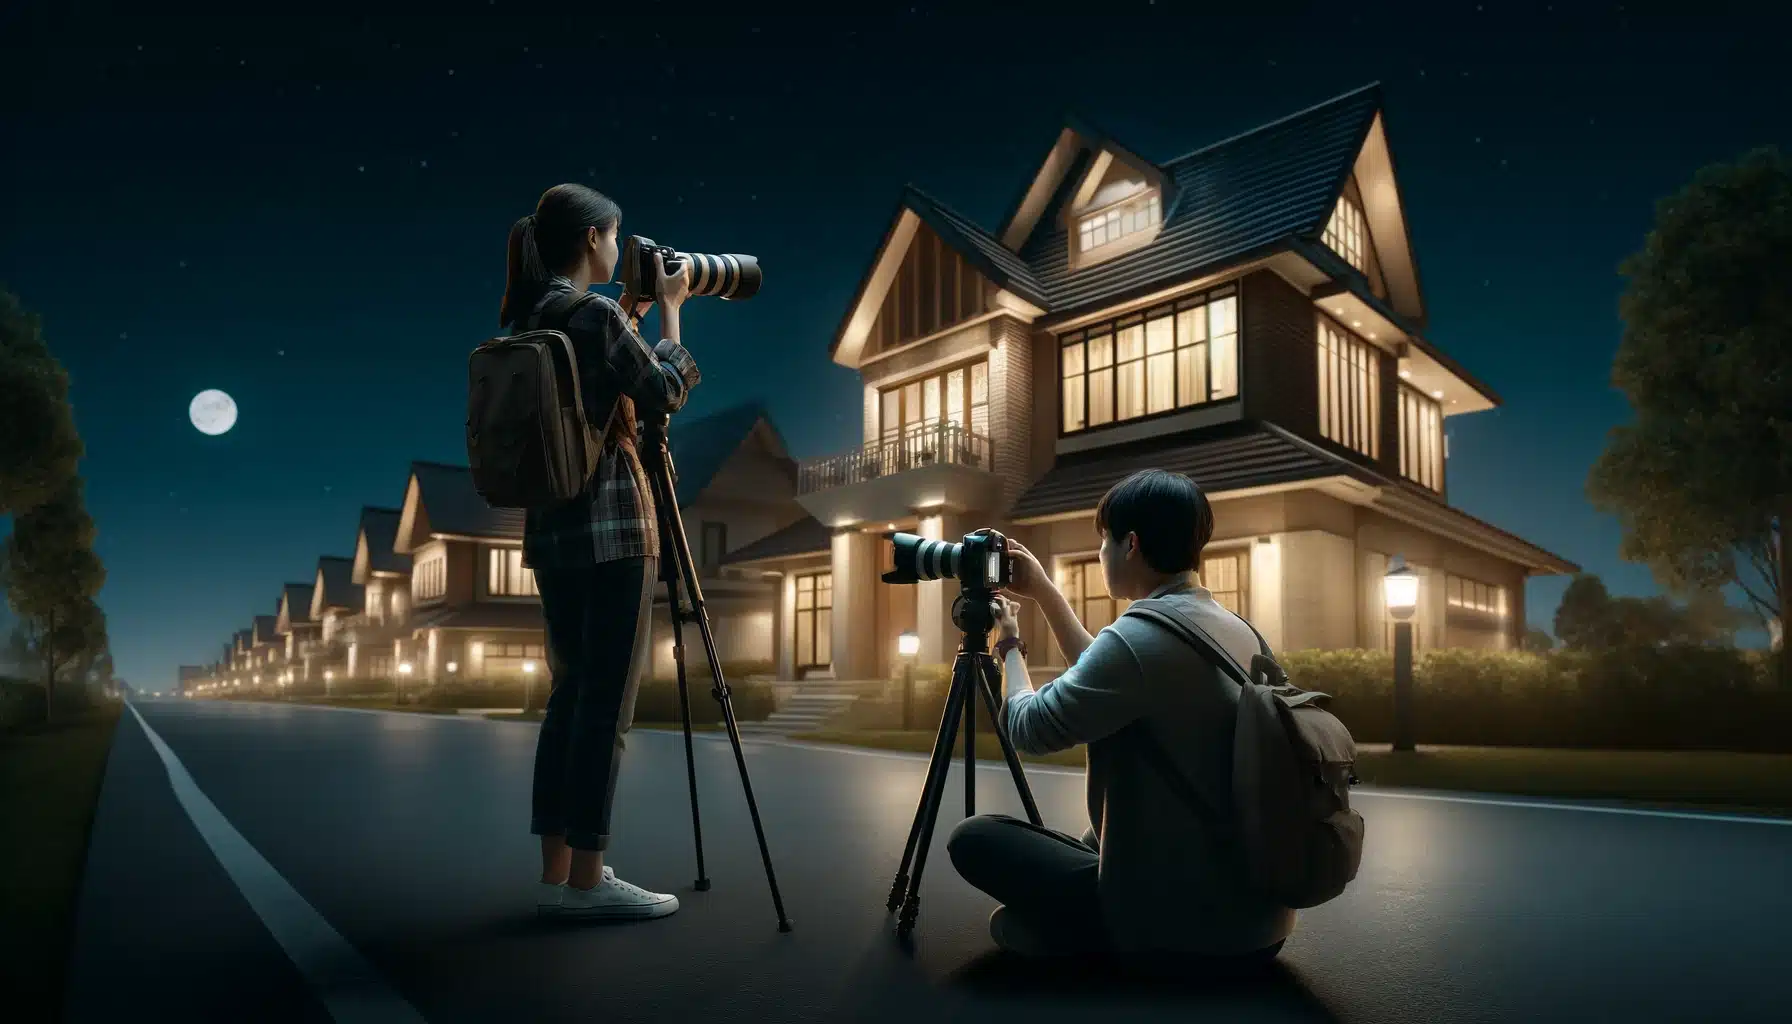 Two photographers capturing long exposure shots of beautifully lit suburban homes at night, under a starry sky.